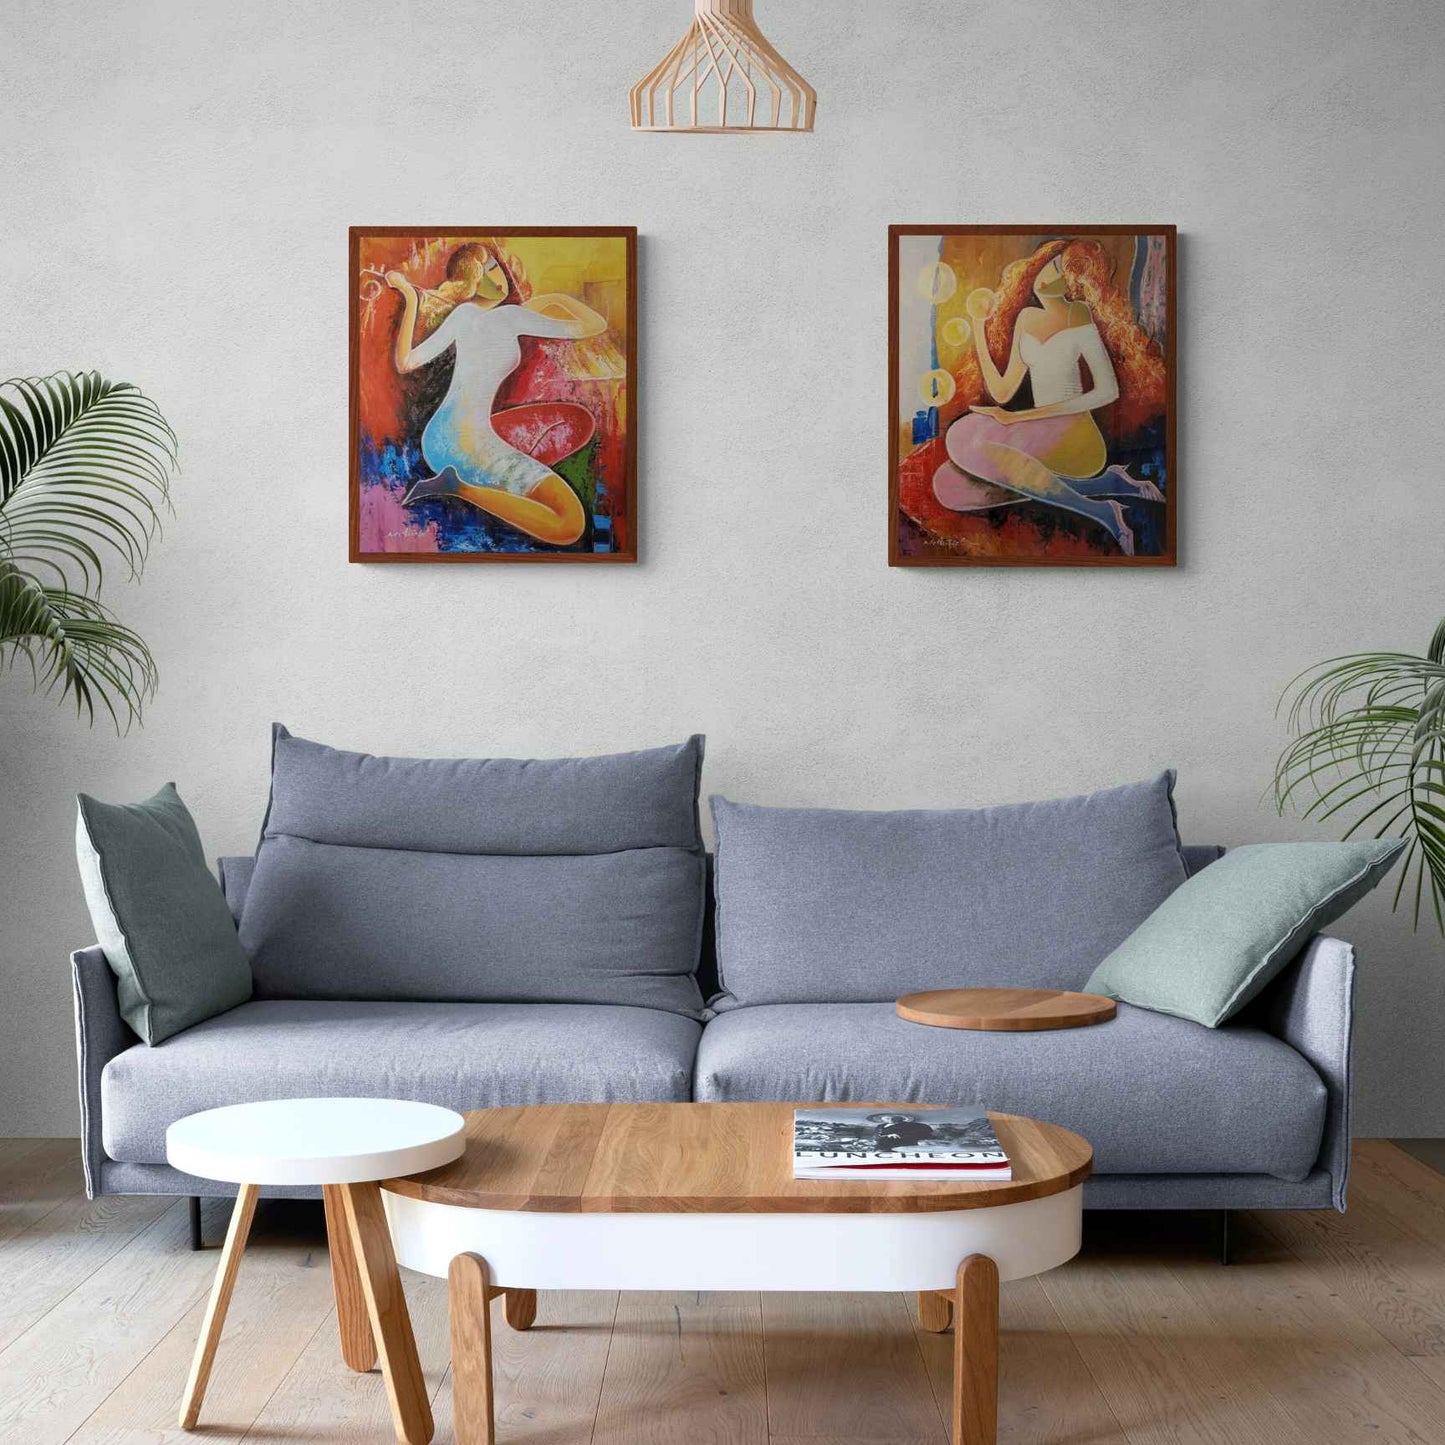 Diptych Painting For the Love of Art 50x60 cm [2 pieces]